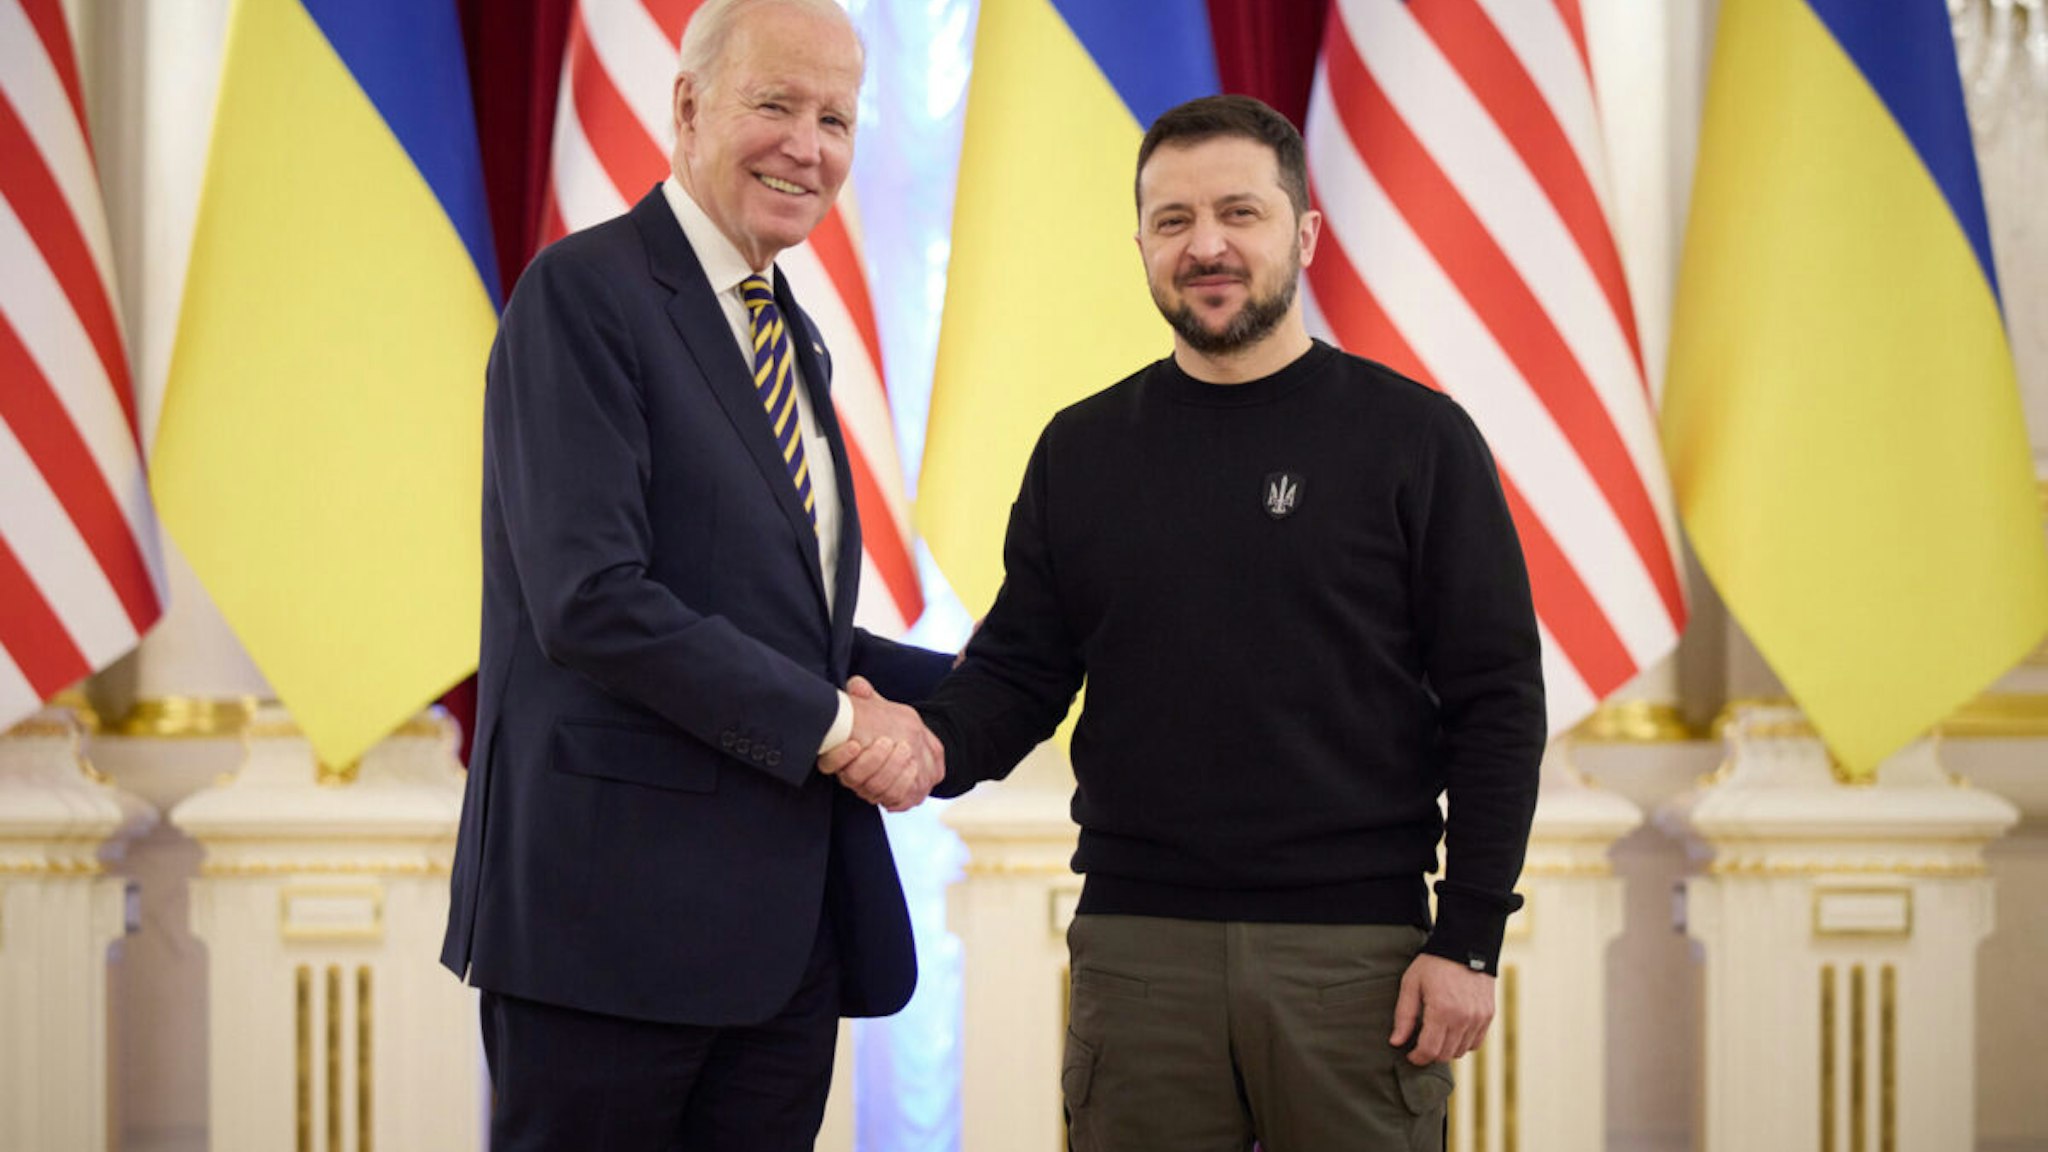 KYIV, UKRAINE - FEBRUARY 20: In this handout photo issued by the Ukrainian Presidential Press Office, U.S. President Joe Biden meets with Ukrainian President Volodymyr Zelensky at the Ukrainian presidential palace on February 20, 2023 in Kyiv, Ukraine. The US President made his first visit to Kyiv since Russia's large-scale invasion last February 24.